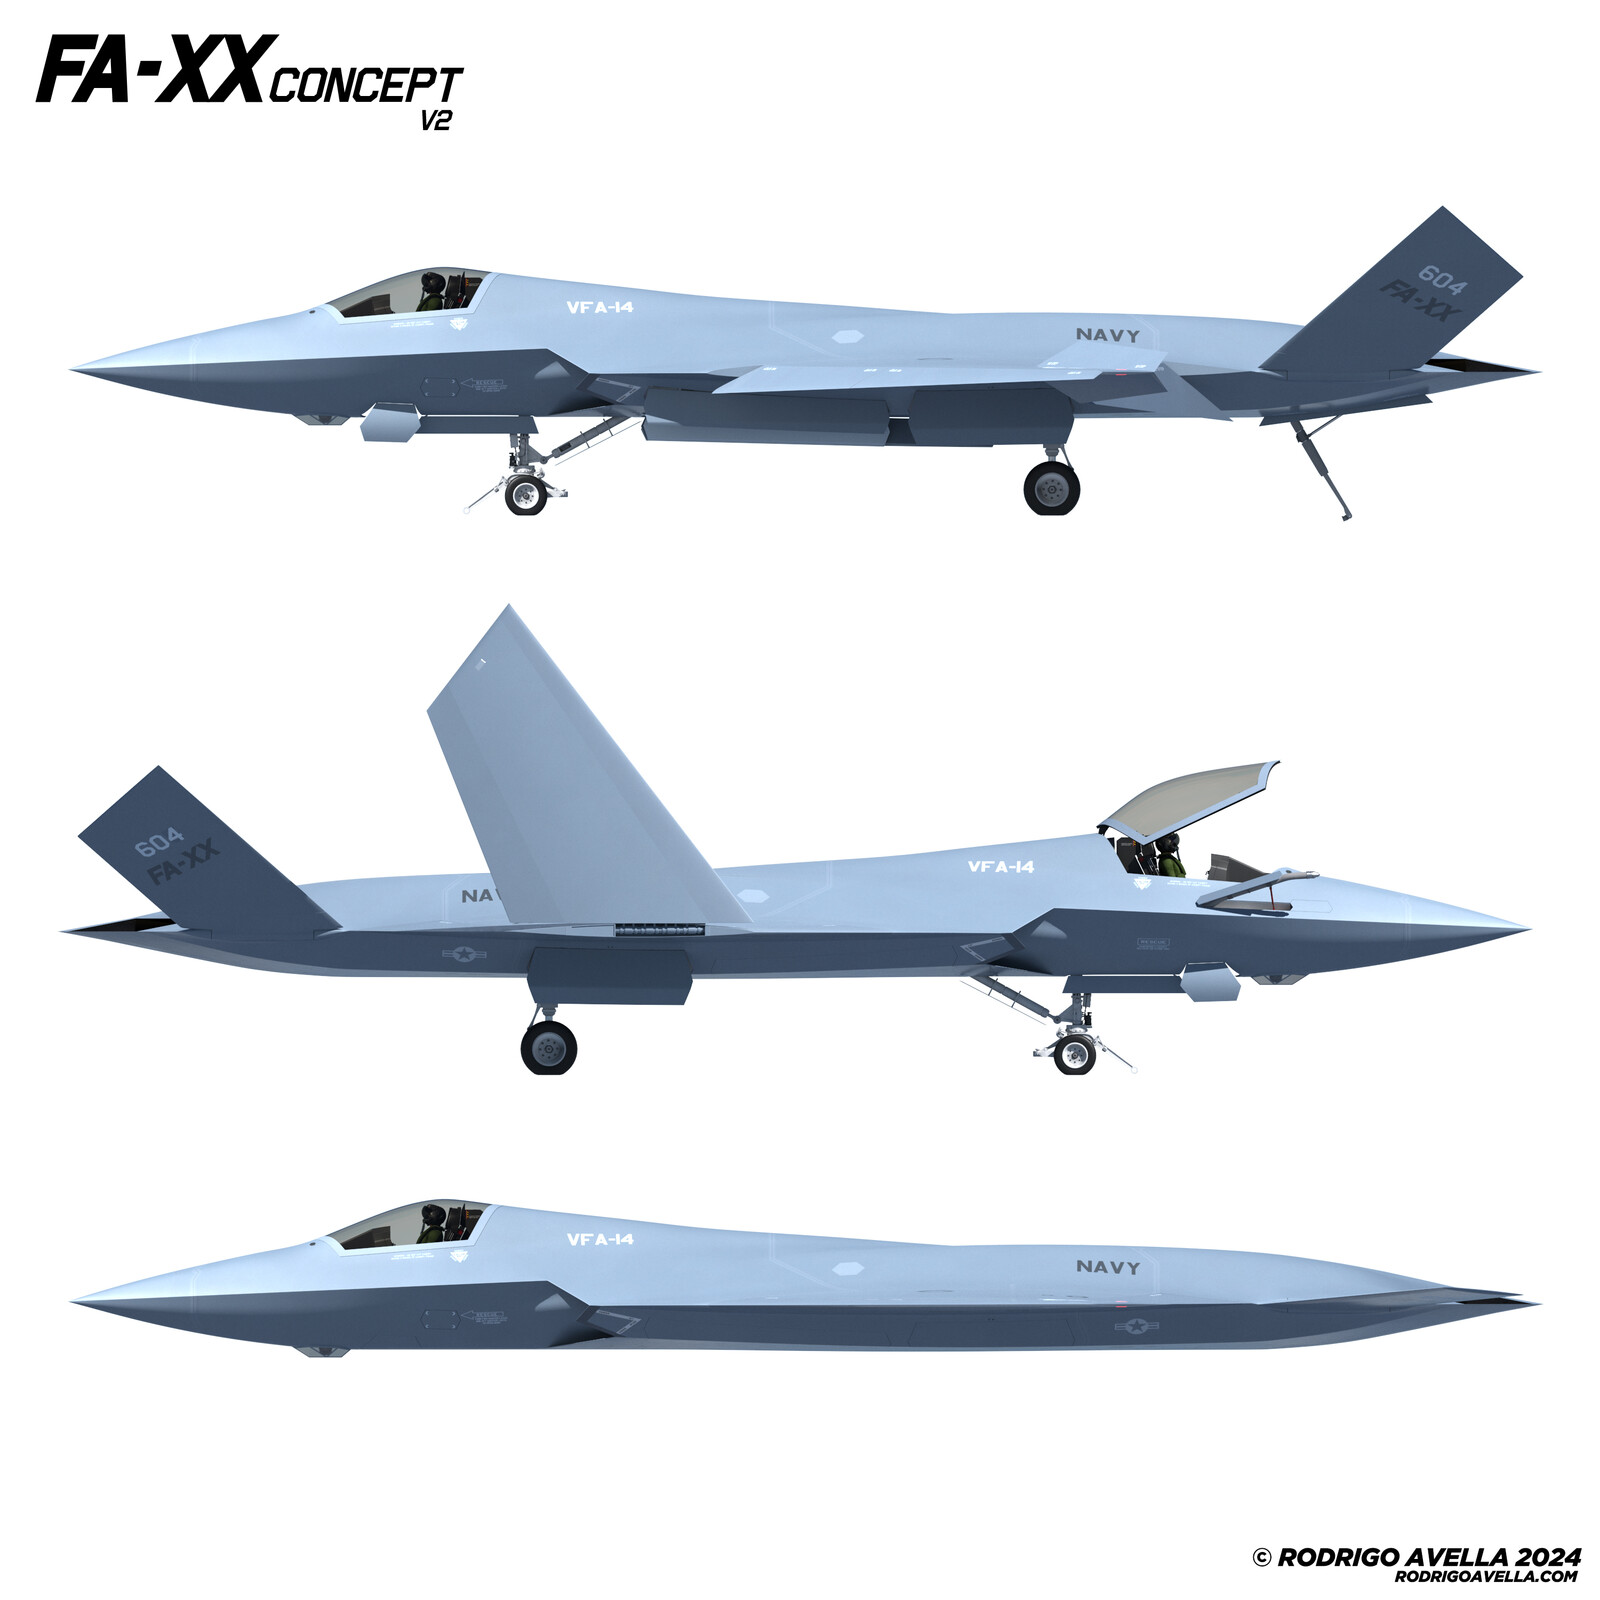 FA-XX V2 - Sixth generation fighter concept - Views